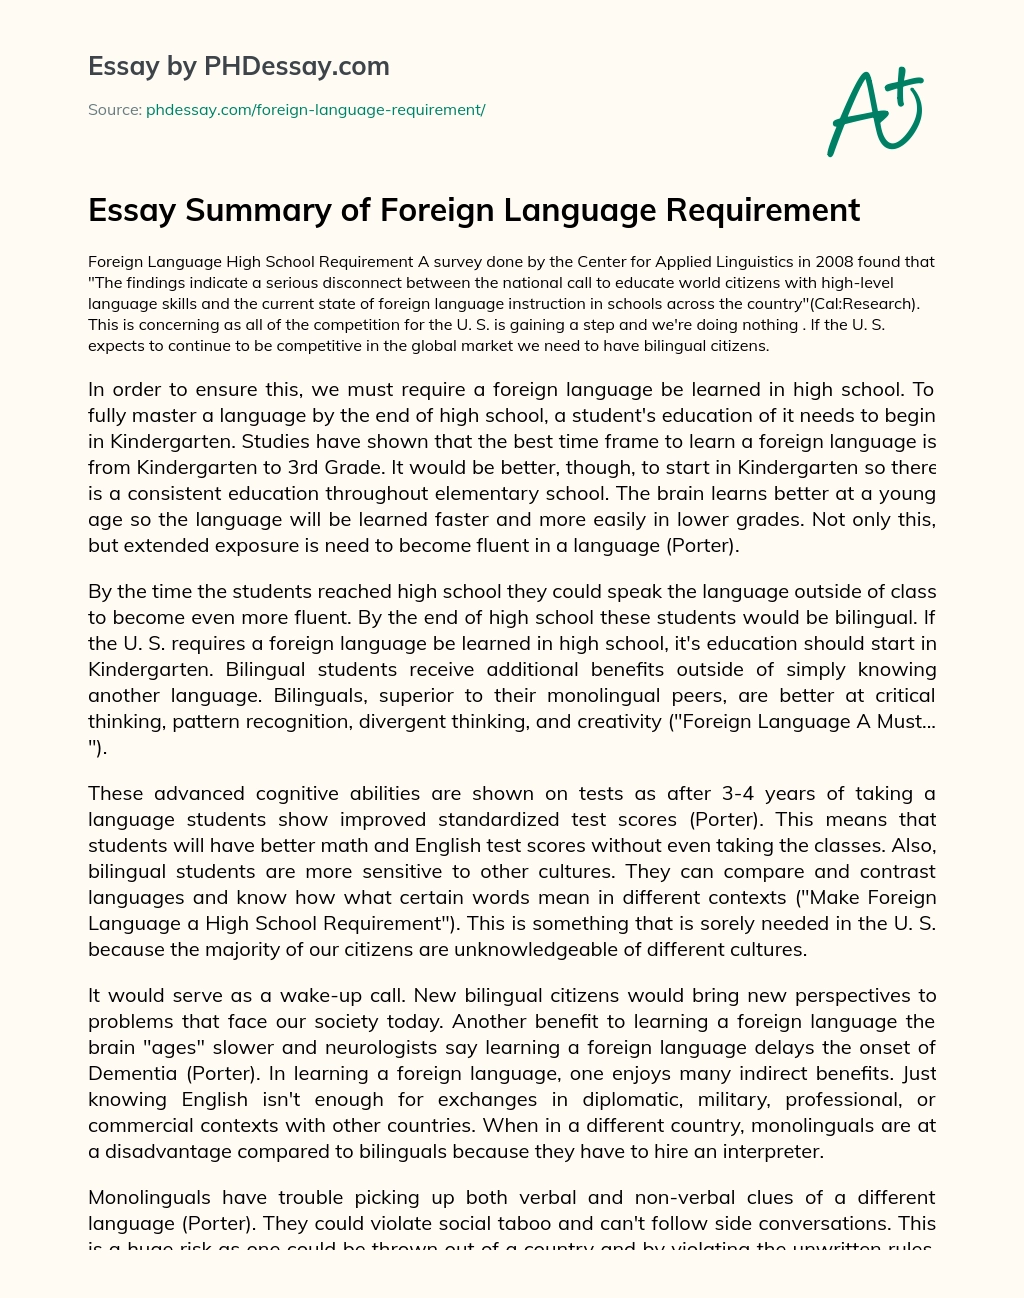 Essay Summary of Foreign Language Requirement essay